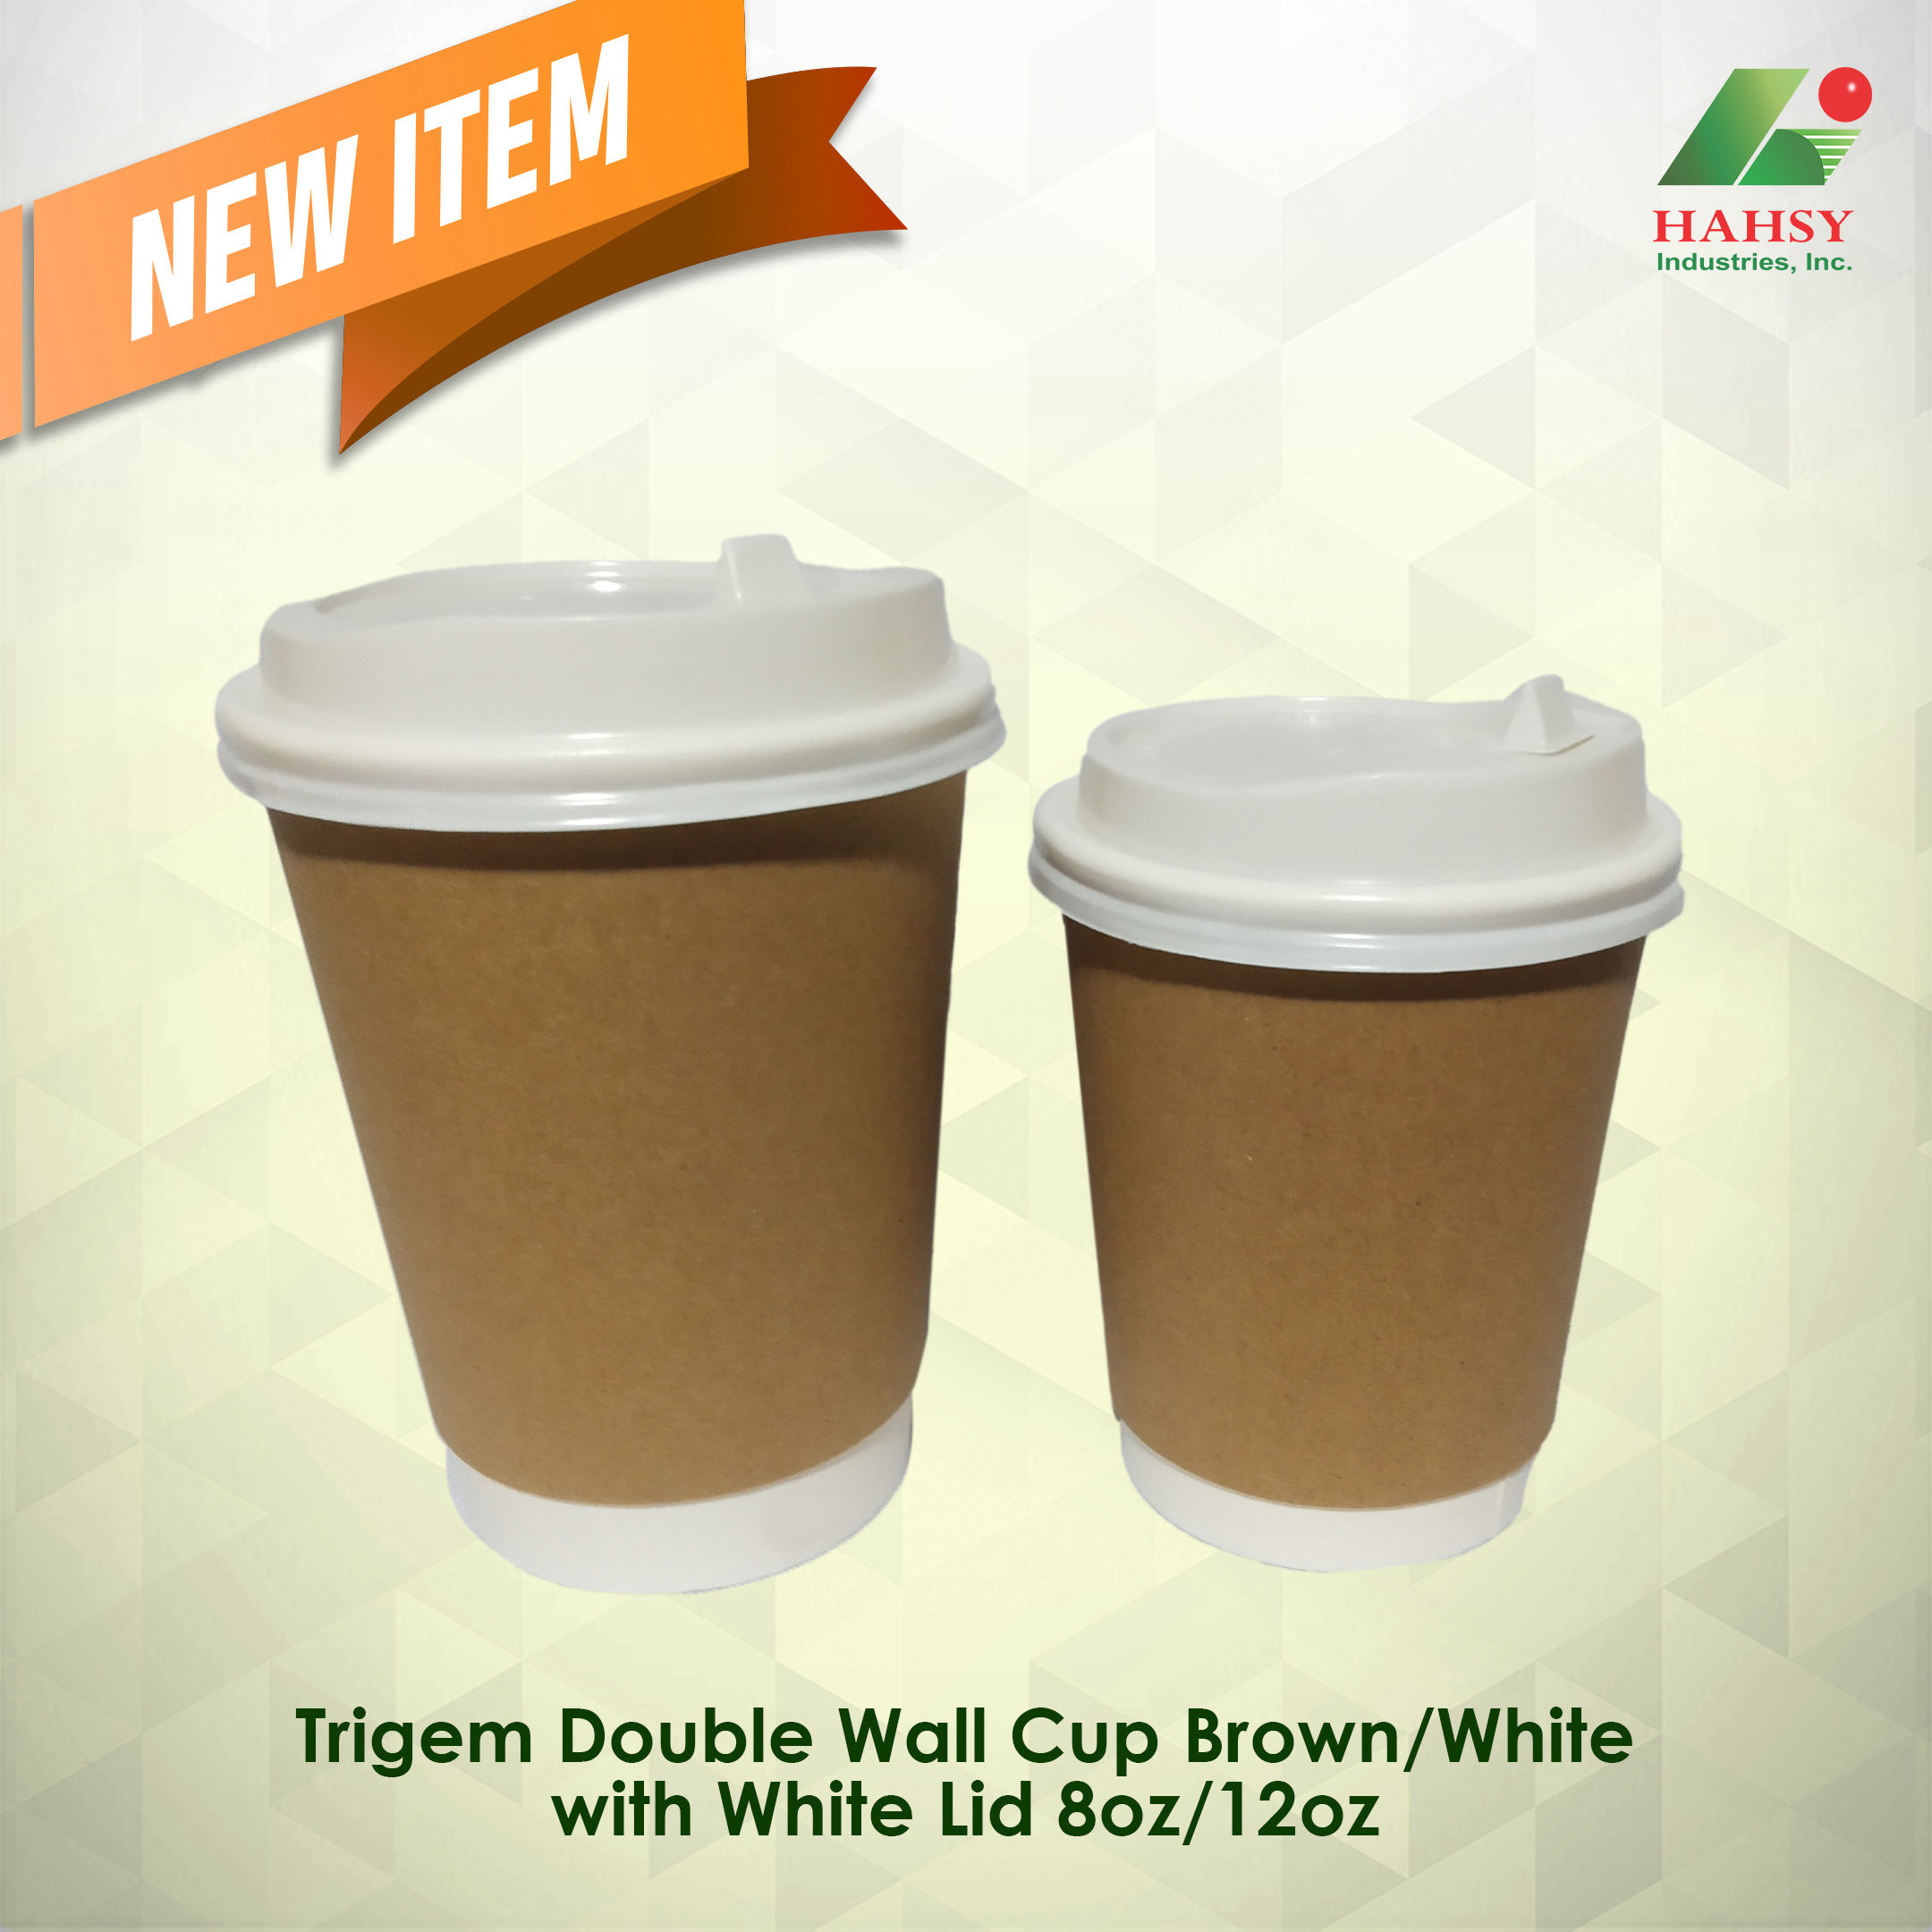 Trigem Double wall cup brown with white lid 8oz 12oz